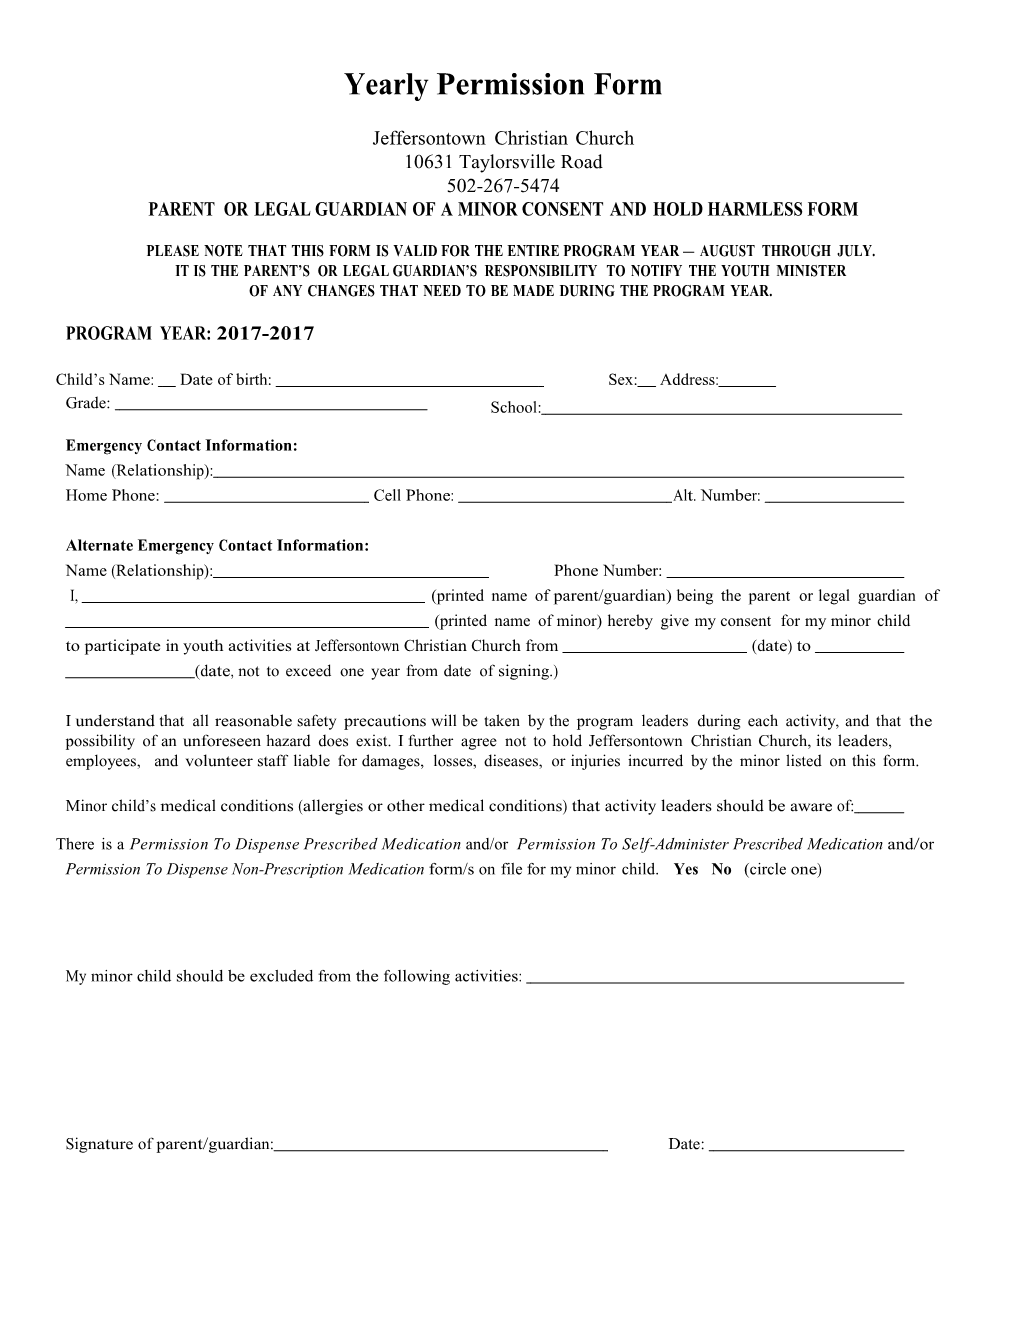 Yearly Permission Form